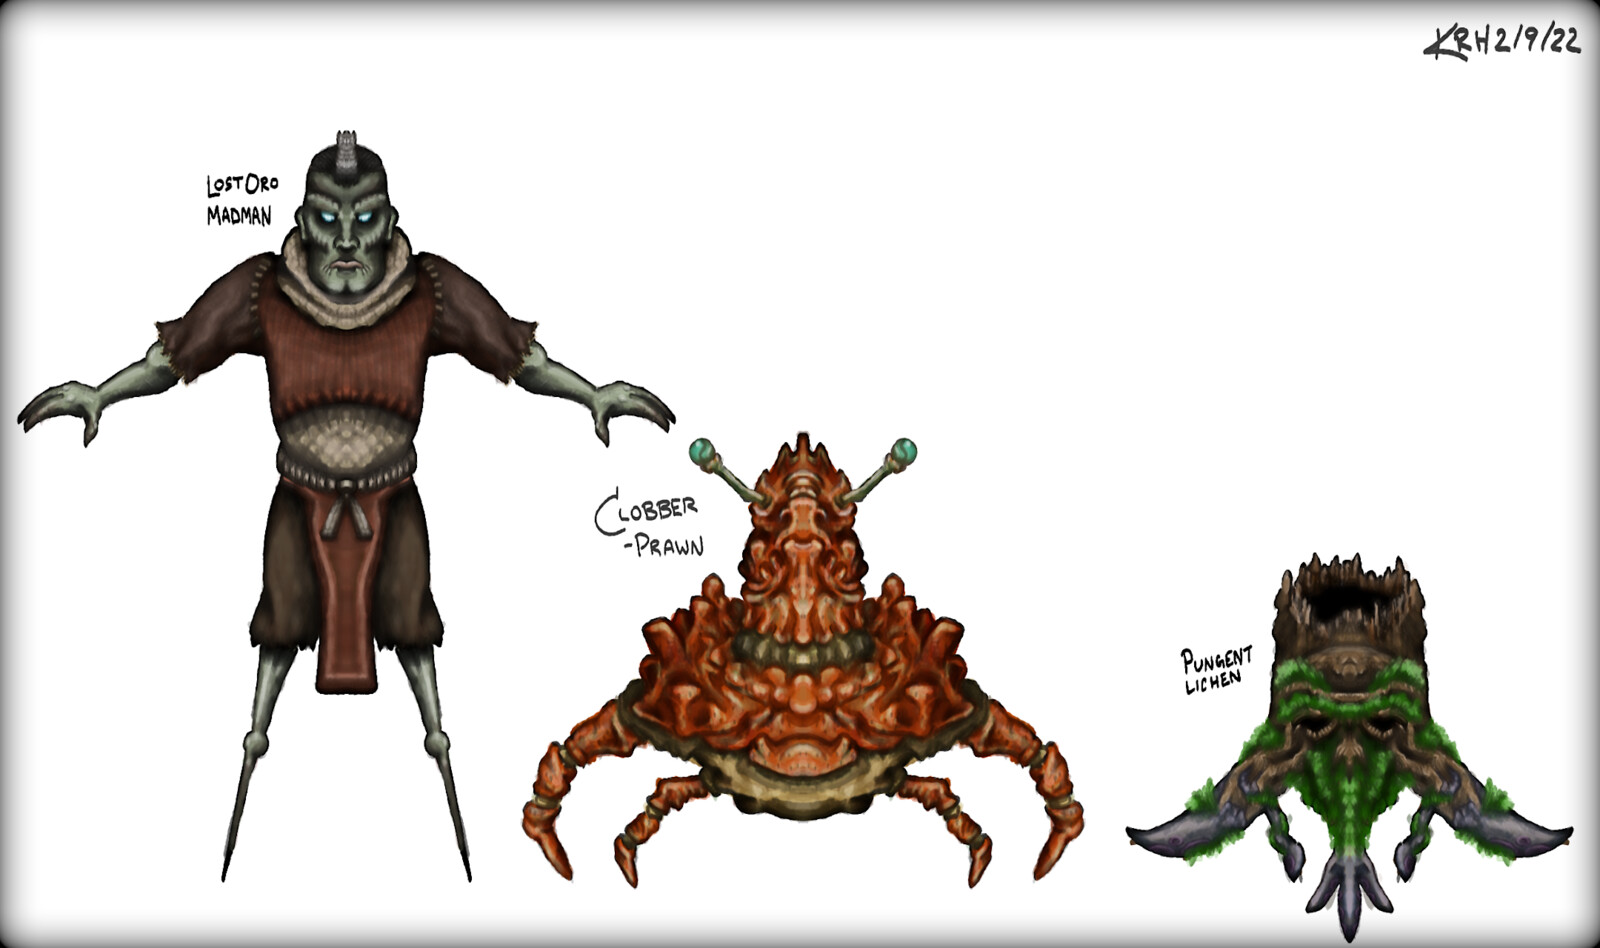 A variety of creatures thought to be found in the depths of the Golem's dungeon, from humanoid to things truly monstrous.